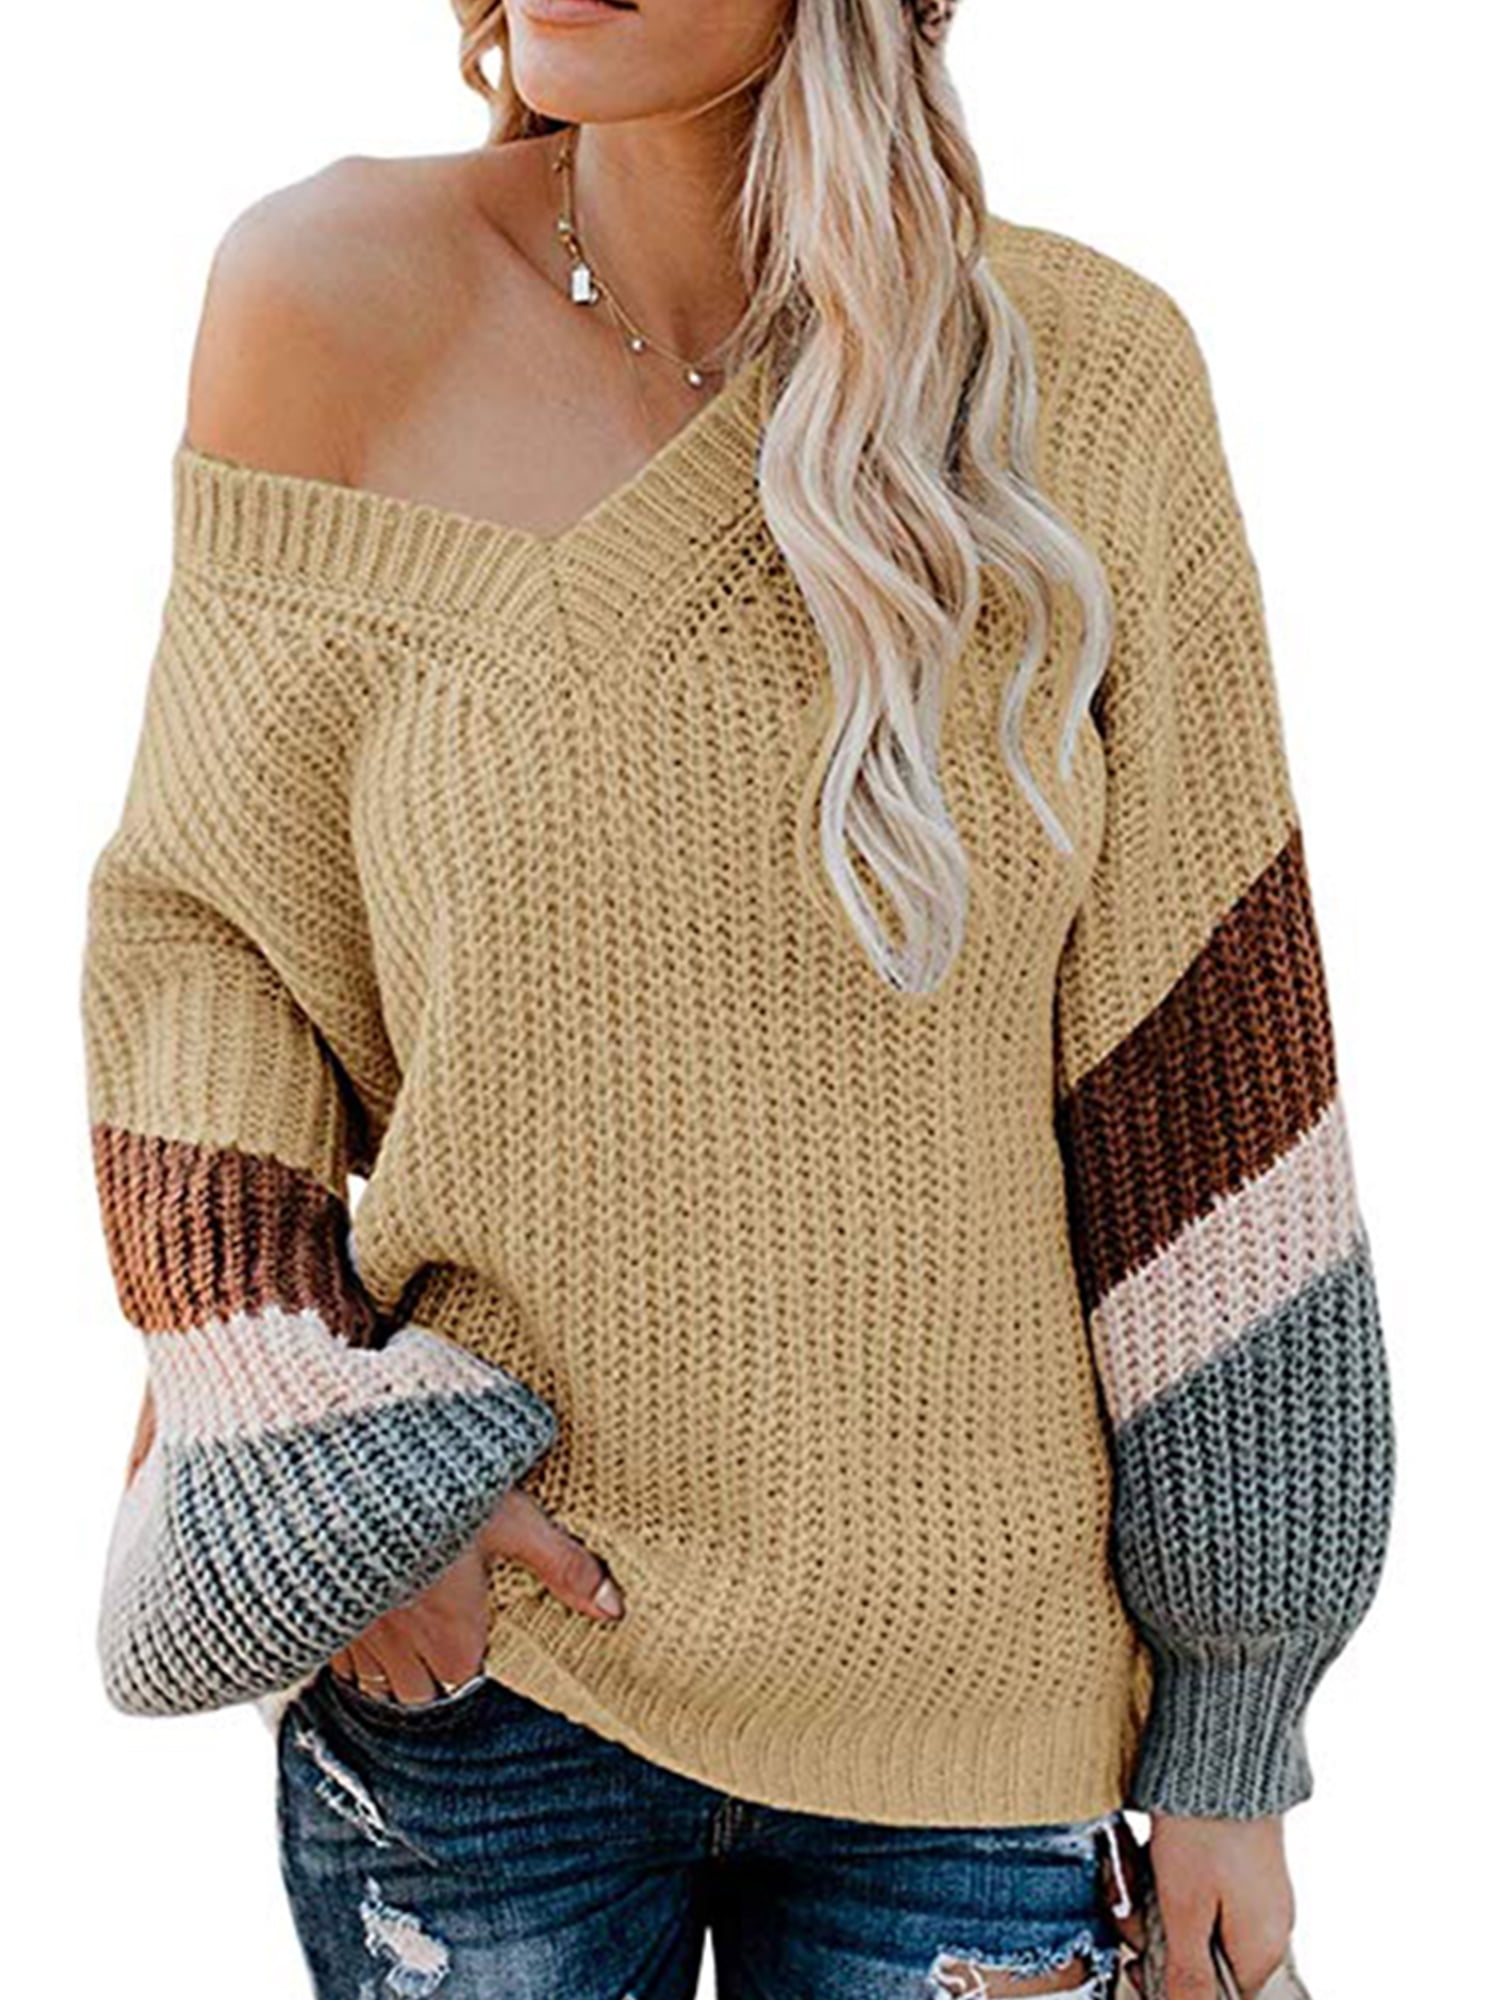 Women's Sweater Long Sleeve Knitted Winter Pullover Baggy Jumper Top Dresses